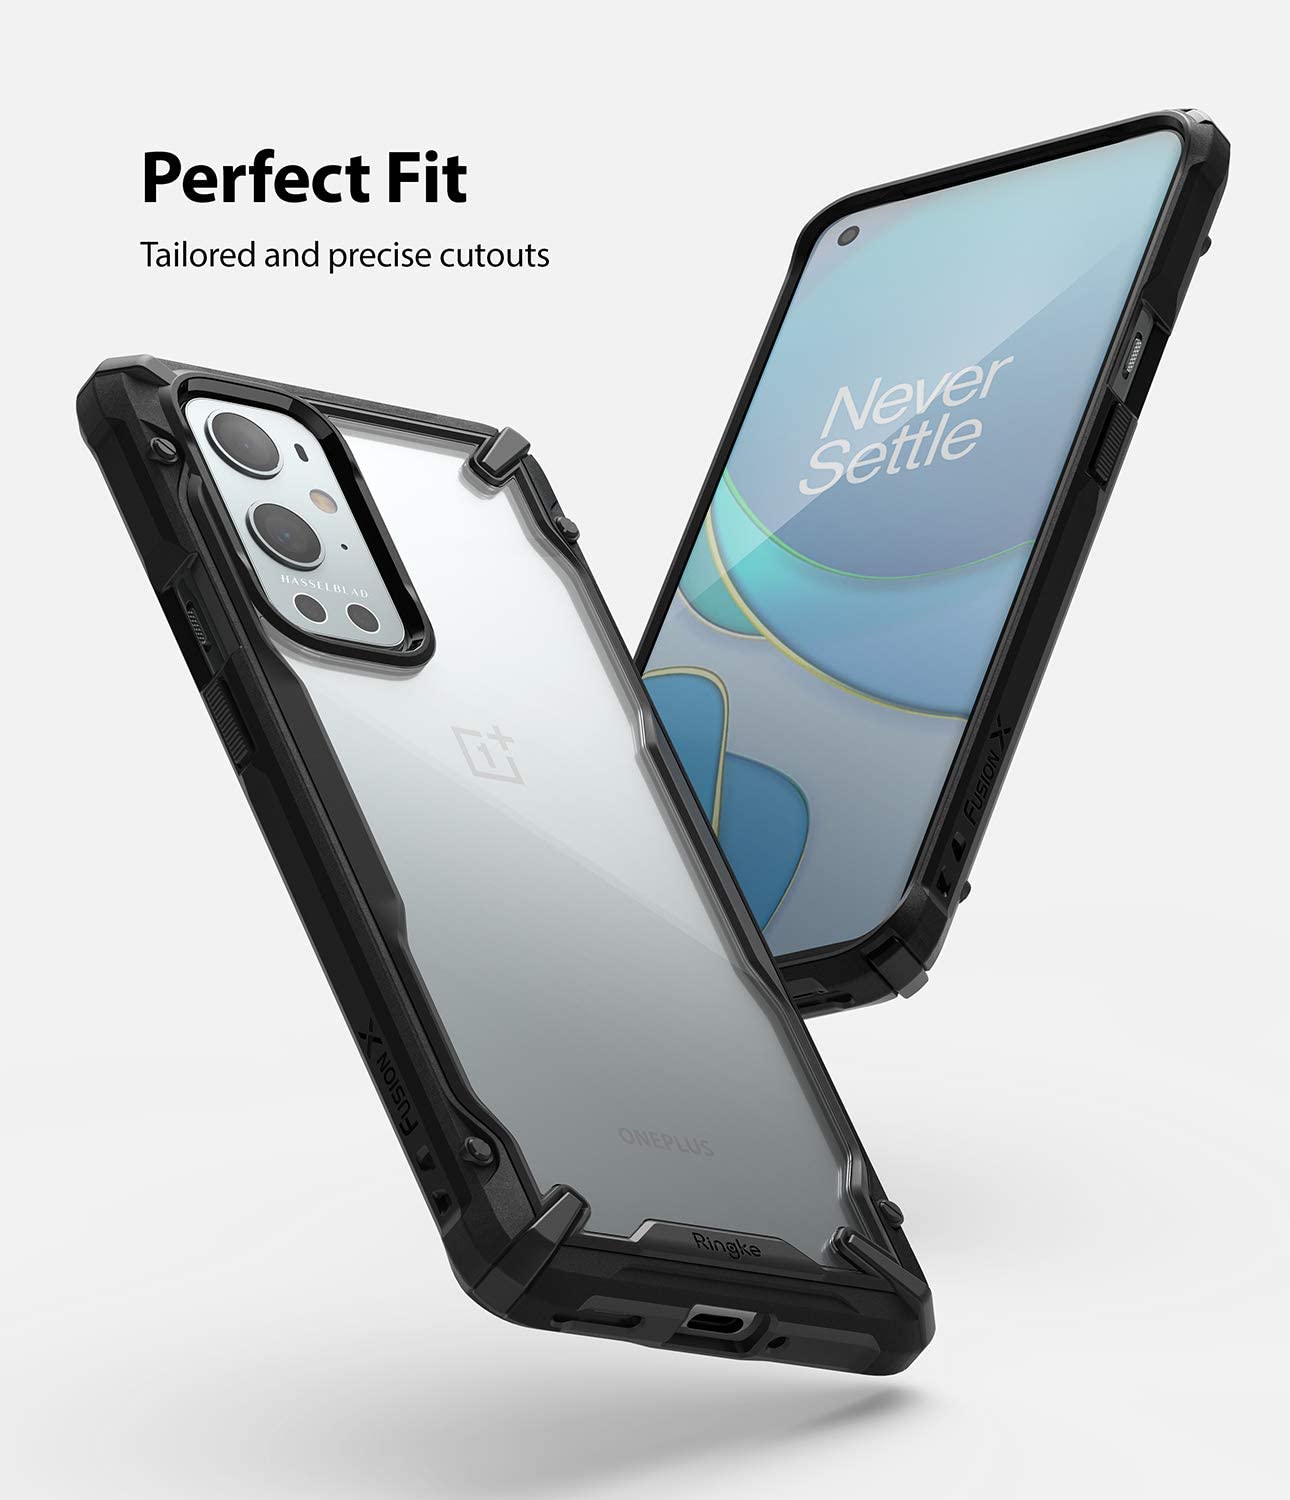 Ringke Fusion-X OnePlus 9 Pro Rugged Military Corner Protection with Transparent PC Back Case Cover